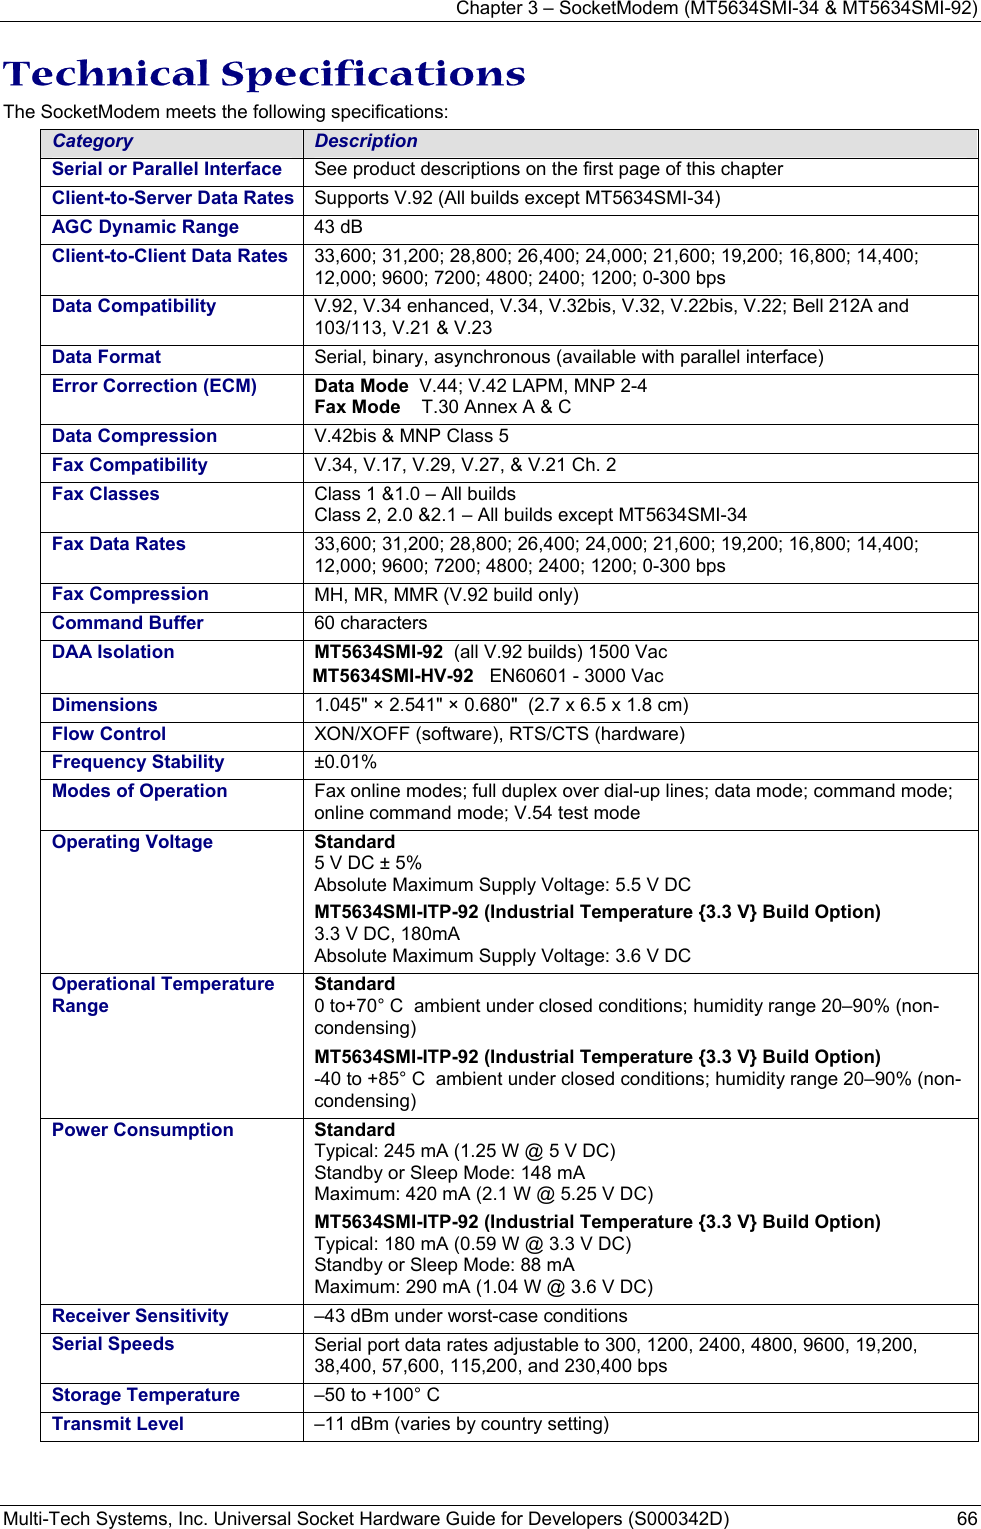 Chapter 3 – SocketModem (MT5634SMI-34 &amp; MT5634SMI-92) Multi-Tech Systems, Inc. Universal Socket Hardware Guide for Developers (S000342D)  66  Technical Specifications  The SocketModem meets the following specifications:  Category  Description Serial or Parallel Interface  See product descriptions on the first page of this chapter Client-to-Server Data Rates  Supports V.92 (All builds except MT5634SMI-34)  AGC Dynamic Range  43 dB Client-to-Client Data Rates  33,600; 31,200; 28,800; 26,400; 24,000; 21,600; 19,200; 16,800; 14,400; 12,000; 9600; 7200; 4800; 2400; 1200; 0-300 bps Data Compatibility  V.92, V.34 enhanced, V.34, V.32bis, V.32, V.22bis, V.22; Bell 212A and 103/113, V.21 &amp; V.23  Data Format  Serial, binary, asynchronous (available with parallel interface) Error Correction (ECM)  Data Mode  V.44; V.42 LAPM, MNP 2-4 Fax Mode    T.30 Annex A &amp; C Data Compression  V.42bis &amp; MNP Class 5 Fax Compatibility  V.34, V.17, V.29, V.27, &amp; V.21 Ch. 2  Fax Classes  Class 1 &amp;1.0 – All builds Class 2, 2.0 &amp;2.1 – All builds except MT5634SMI-34 Fax Data Rates  33,600; 31,200; 28,800; 26,400; 24,000; 21,600; 19,200; 16,800; 14,400; 12,000; 9600; 7200; 4800; 2400; 1200; 0-300 bps Fax Compression  MH, MR, MMR (V.92 build only) Command Buffer  60 characters DAA Isolation   MT5634SMI-92  (all V.92 builds) 1500 Vac MT5634SMI-HV-92   EN60601 - 3000 Vac Dimensions  1.045&quot; × 2.541&quot; × 0.680&quot;  (2.7 x 6.5 x 1.8 cm) Flow Control  XON/XOFF (software), RTS/CTS (hardware) Frequency Stability  ±0.01% Modes of Operation  Fax online modes; full duplex over dial-up lines; data mode; command mode; online command mode; V.54 test mode Operating Voltage  Standard 5 V DC ± 5% Absolute Maximum Supply Voltage: 5.5 V DC MT5634SMI-ITP-92 (Industrial Temperature {3.3 V} Build Option) 3.3 V DC, 180mA Absolute Maximum Supply Voltage: 3.6 V DC  Operational Temperature Range  Standard 0 to+70° C  ambient under closed conditions; humidity range 20–90% (non-condensing) MT5634SMI-ITP-92 (Industrial Temperature {3.3 V} Build Option) -40 to +85° C  ambient under closed conditions; humidity range 20–90% (non-condensing) Power Consumption   Standard  Typical: 245 mA (1.25 W @ 5 V DC) Standby or Sleep Mode: 148 mA Maximum: 420 mA (2.1 W @ 5.25 V DC) MT5634SMI-ITP-92 (Industrial Temperature {3.3 V} Build Option) Typical: 180 mA (0.59 W @ 3.3 V DC) Standby or Sleep Mode: 88 mA Maximum: 290 mA (1.04 W @ 3.6 V DC) Receiver Sensitivity  –43 dBm under worst-case conditions Serial Speeds   Serial port data rates adjustable to 300, 1200, 2400, 4800, 9600, 19,200, 38,400, 57,600, 115,200, and 230,400 bps Storage Temperature  –50 to +100° C    Transmit Level  –11 dBm (varies by country setting)  